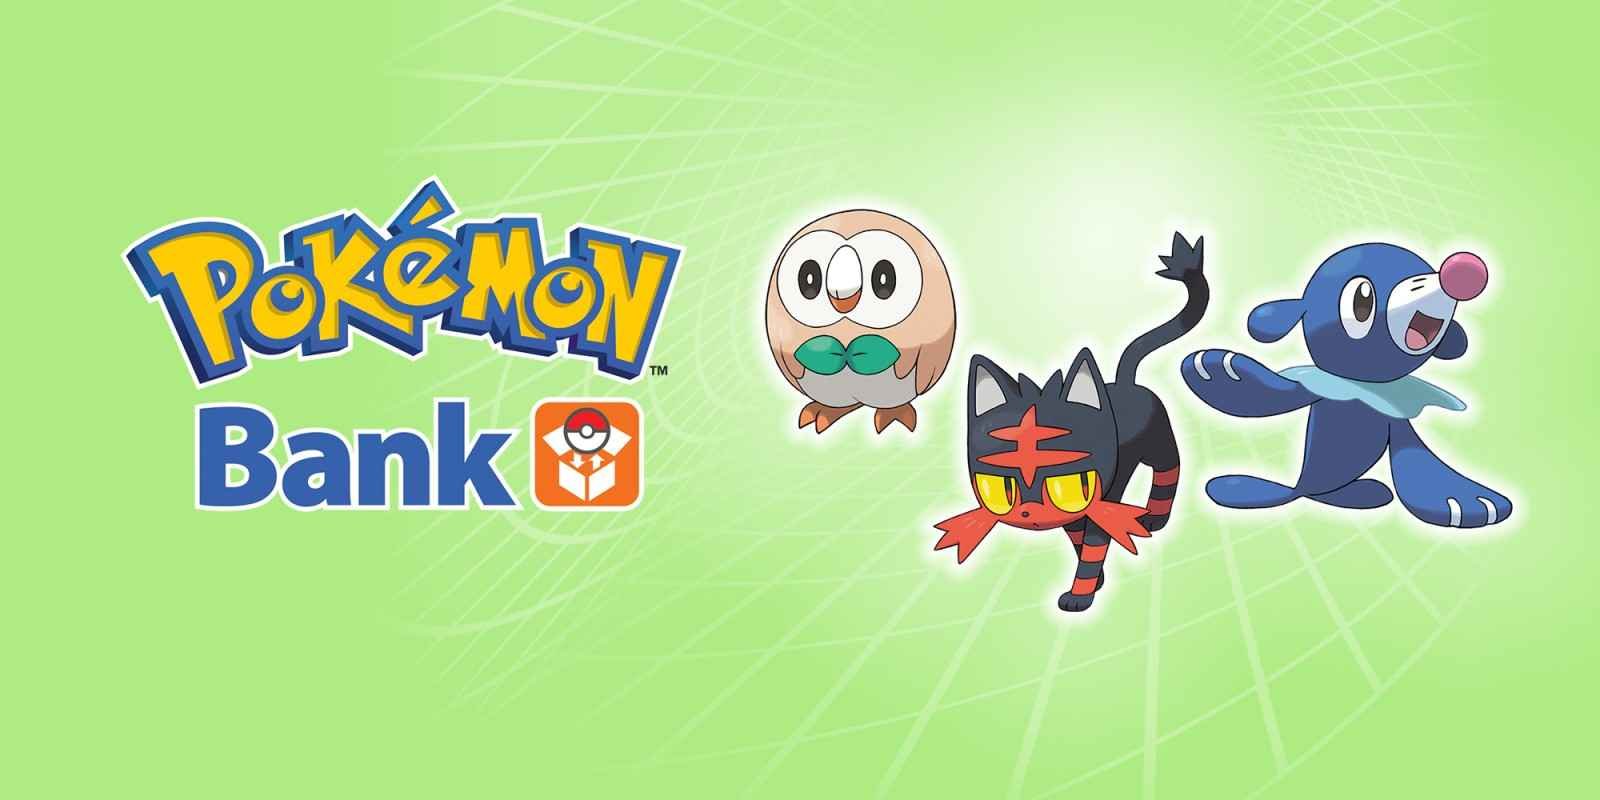 Are Pokemon Bank servers down Here is how you can check server status online